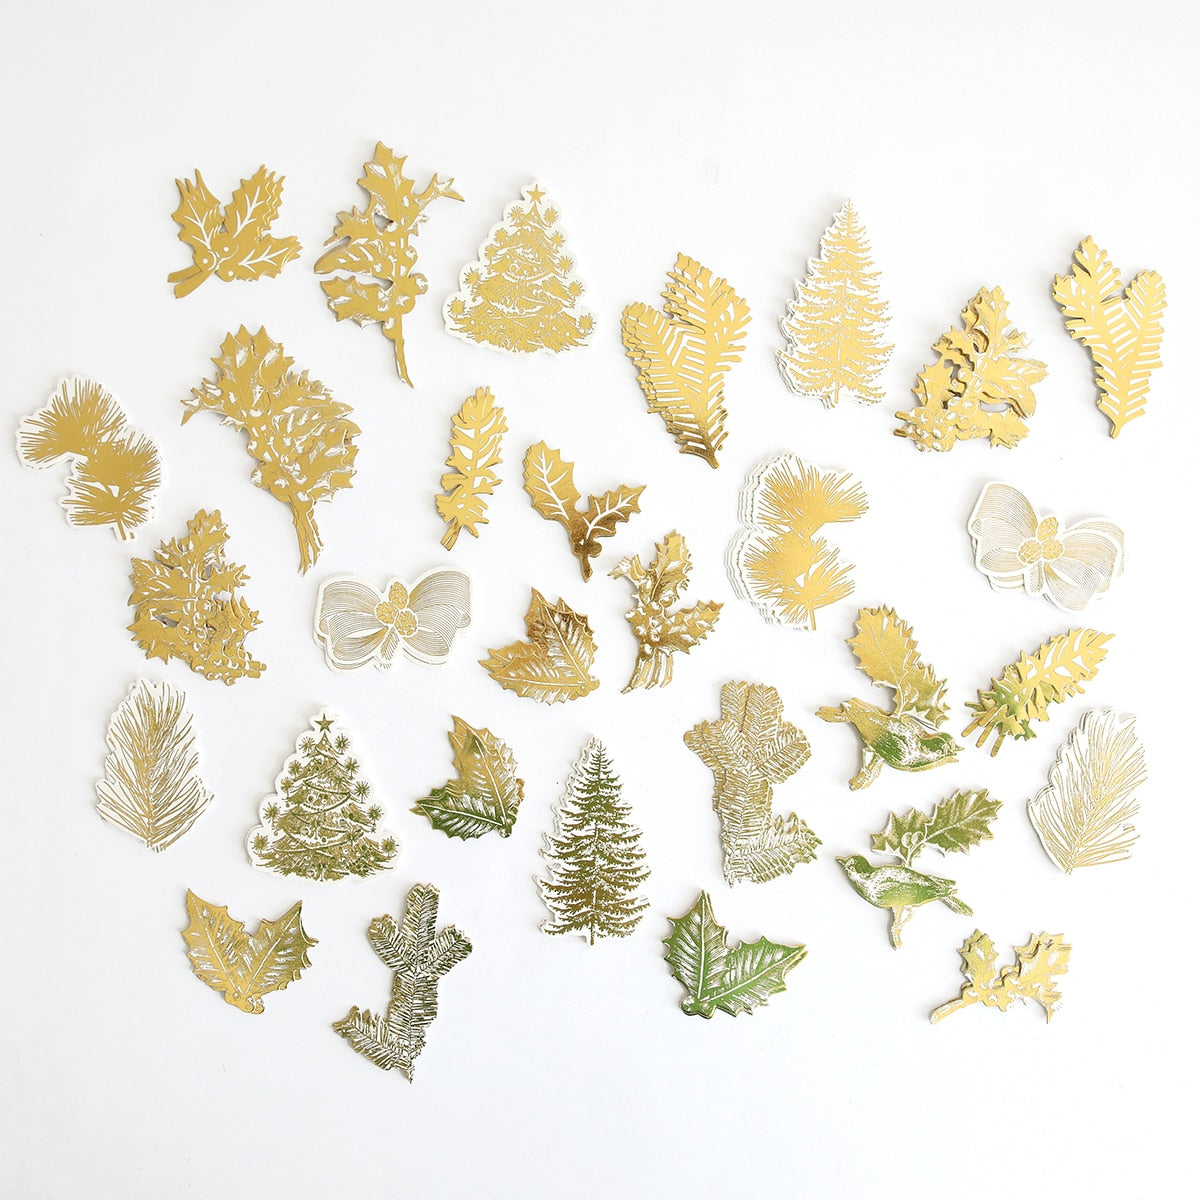 a collection of gold and silver leaf shapes.